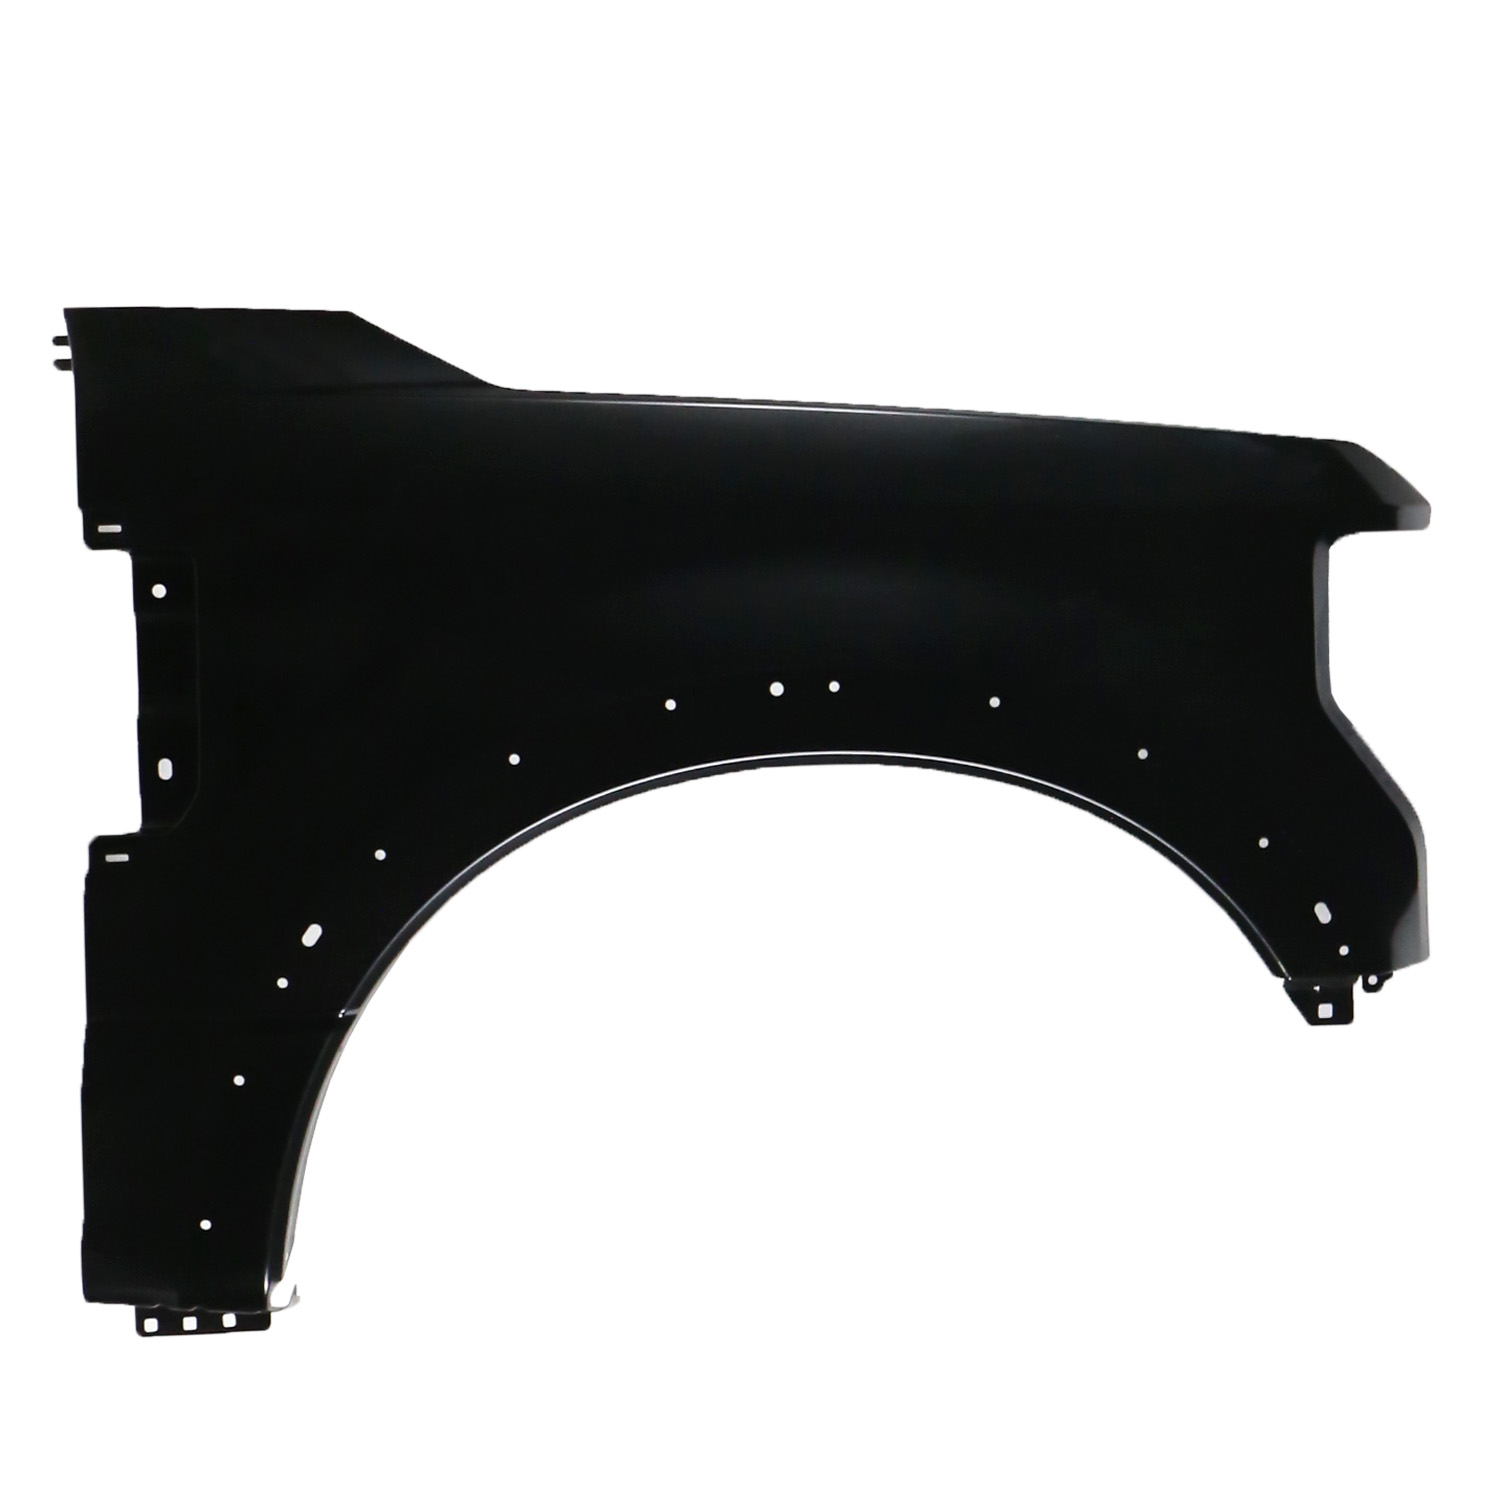 Aftermarket FENDERS for FORD - F-250 SUPER DUTY, F-250 SUPER DUTY,17-19,RT Front fender assy